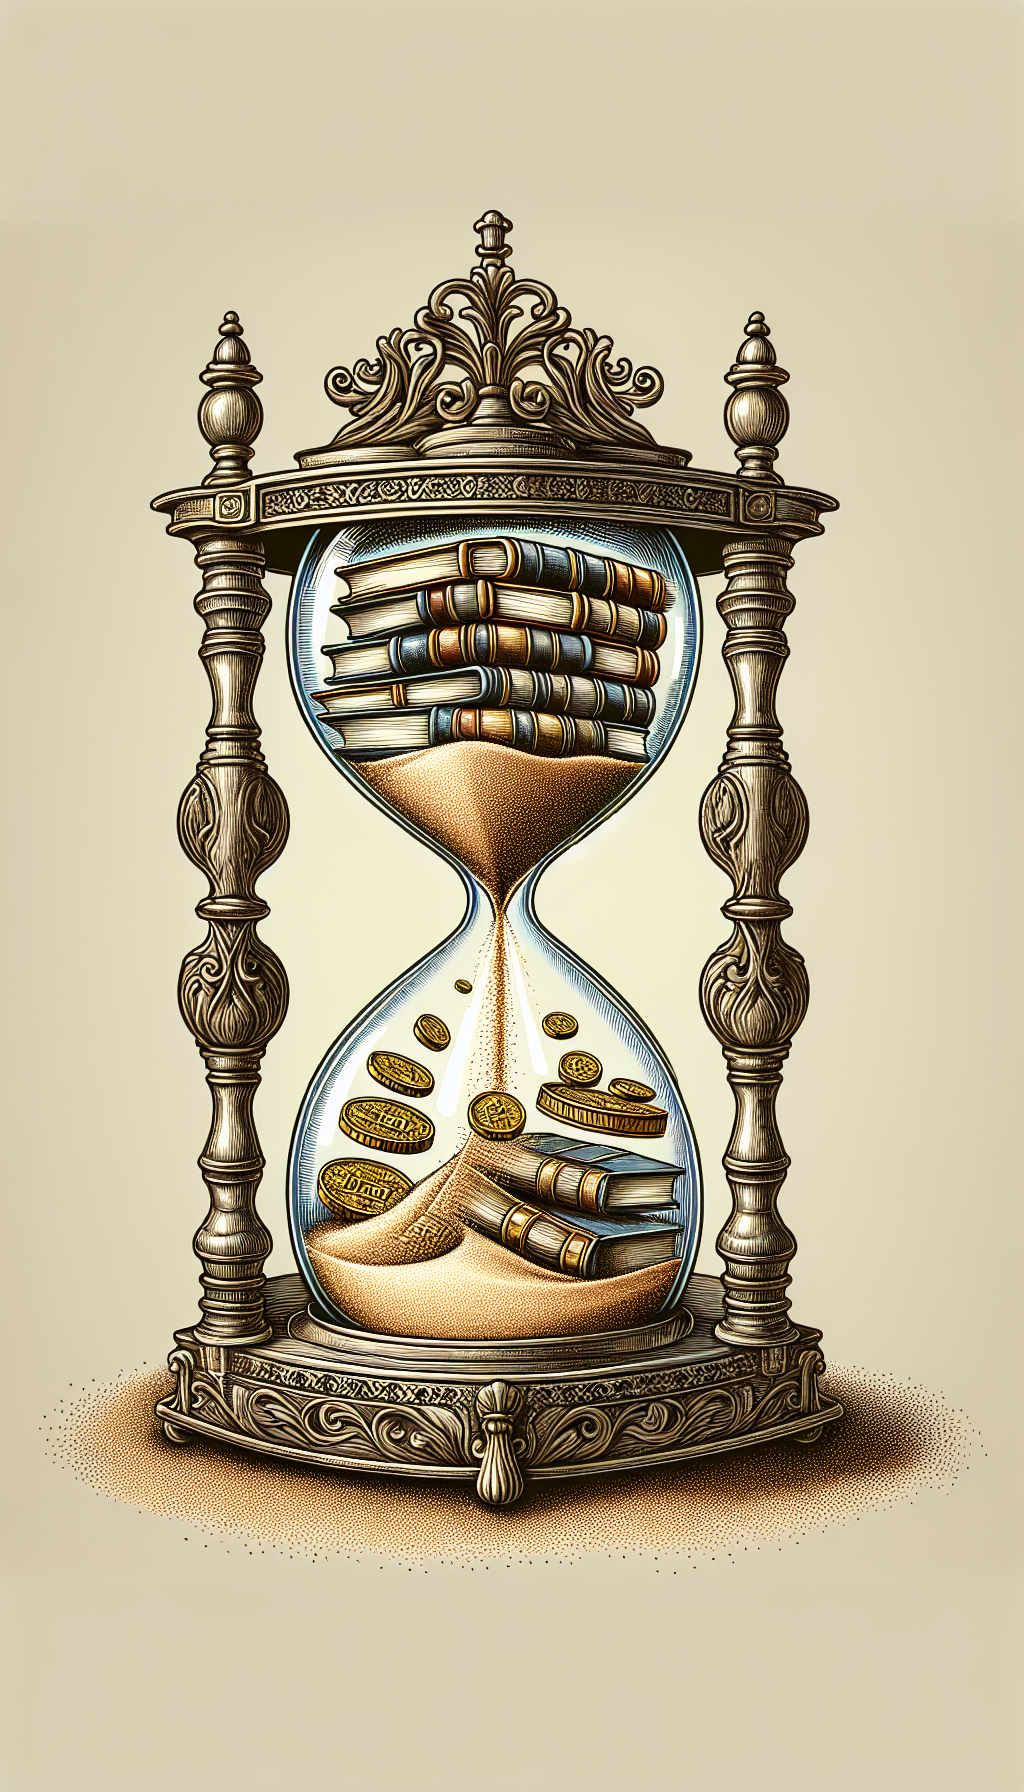 An illustration of a vintage, ornate hourglass where the sands are intricately designed book spines representing different eras and genres. As the sands trickle down, they morph into shimmering gold coins upon reaching the lower bulb, symbolizing the fluctuating values of rare books over time due to market trends. The image seamlessly blends Victorian etchings with sleek contemporary lines, capturing both antiquity and modernity.